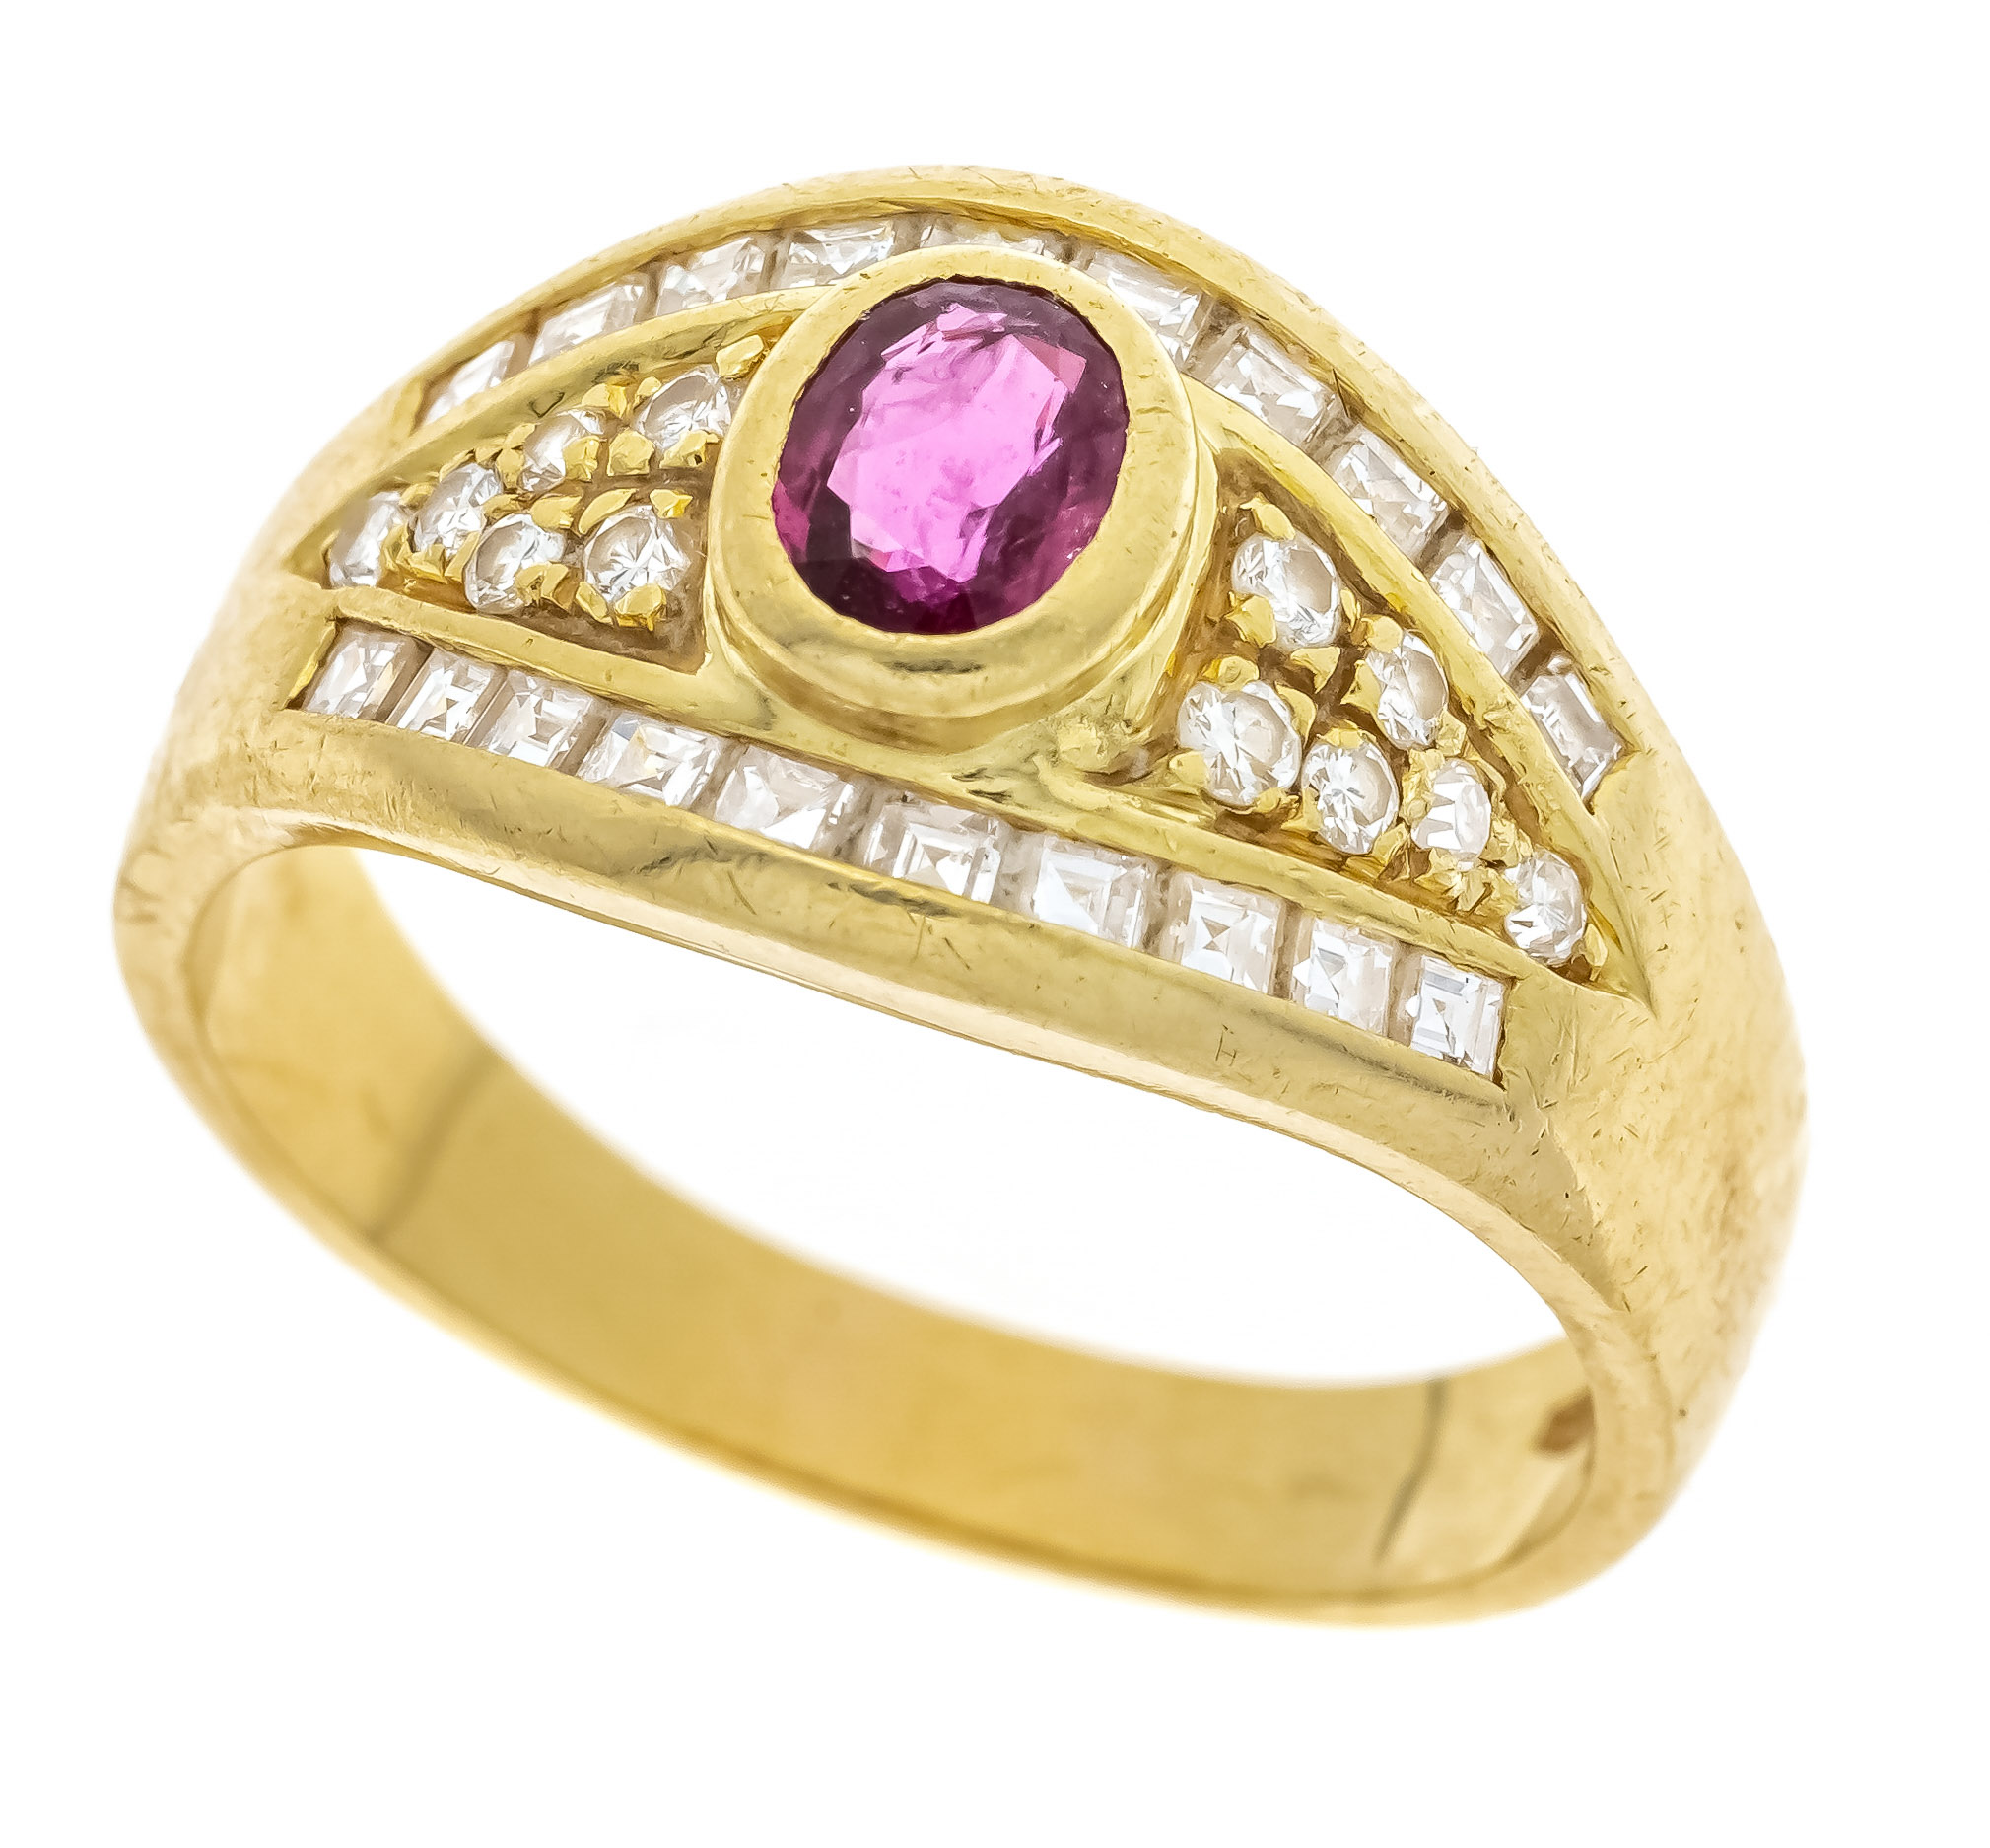 Ruby-brilliant ring GG 750/000 with one oval faceted ruby 4,8 x 3,9 mm, l.bluish red, transparent